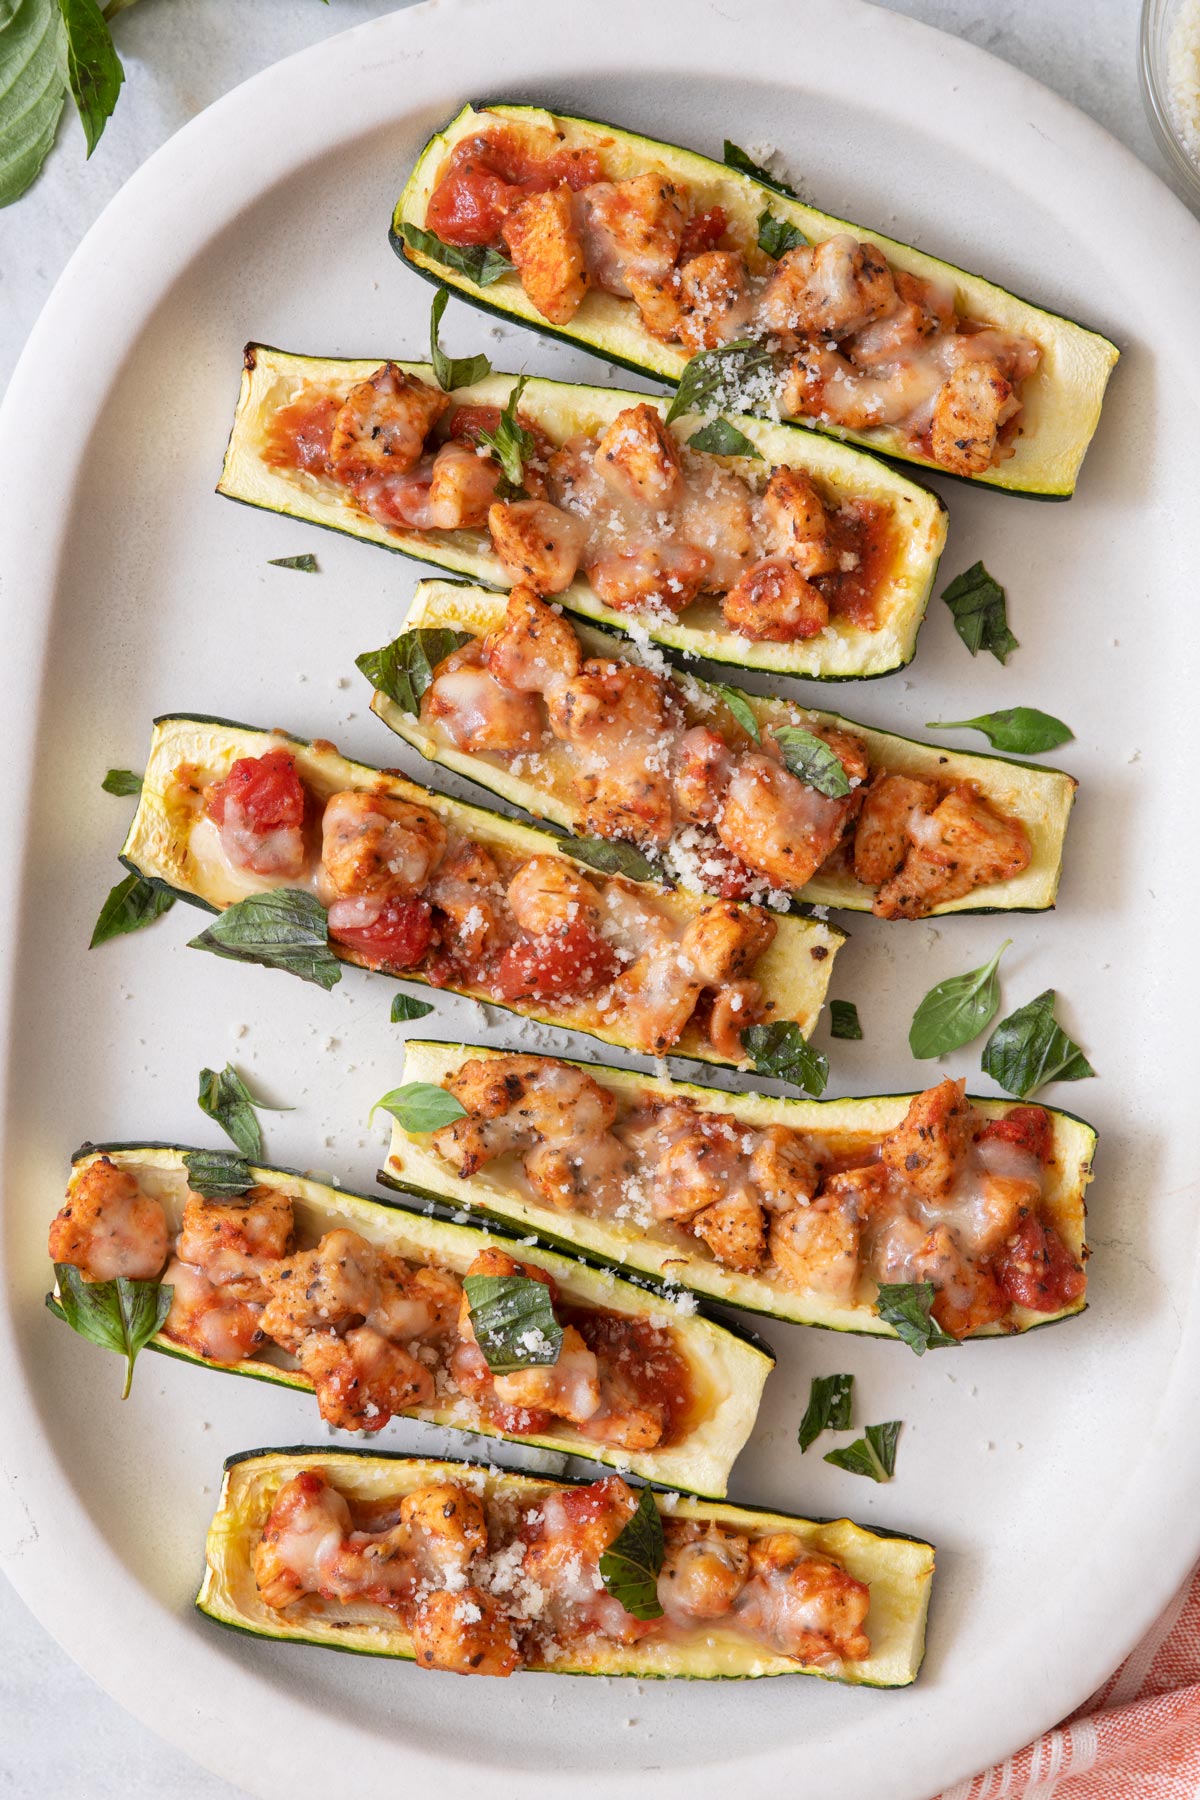 Large oval serving plate with zucchini boats stuffed with chicken and topped with cheese.